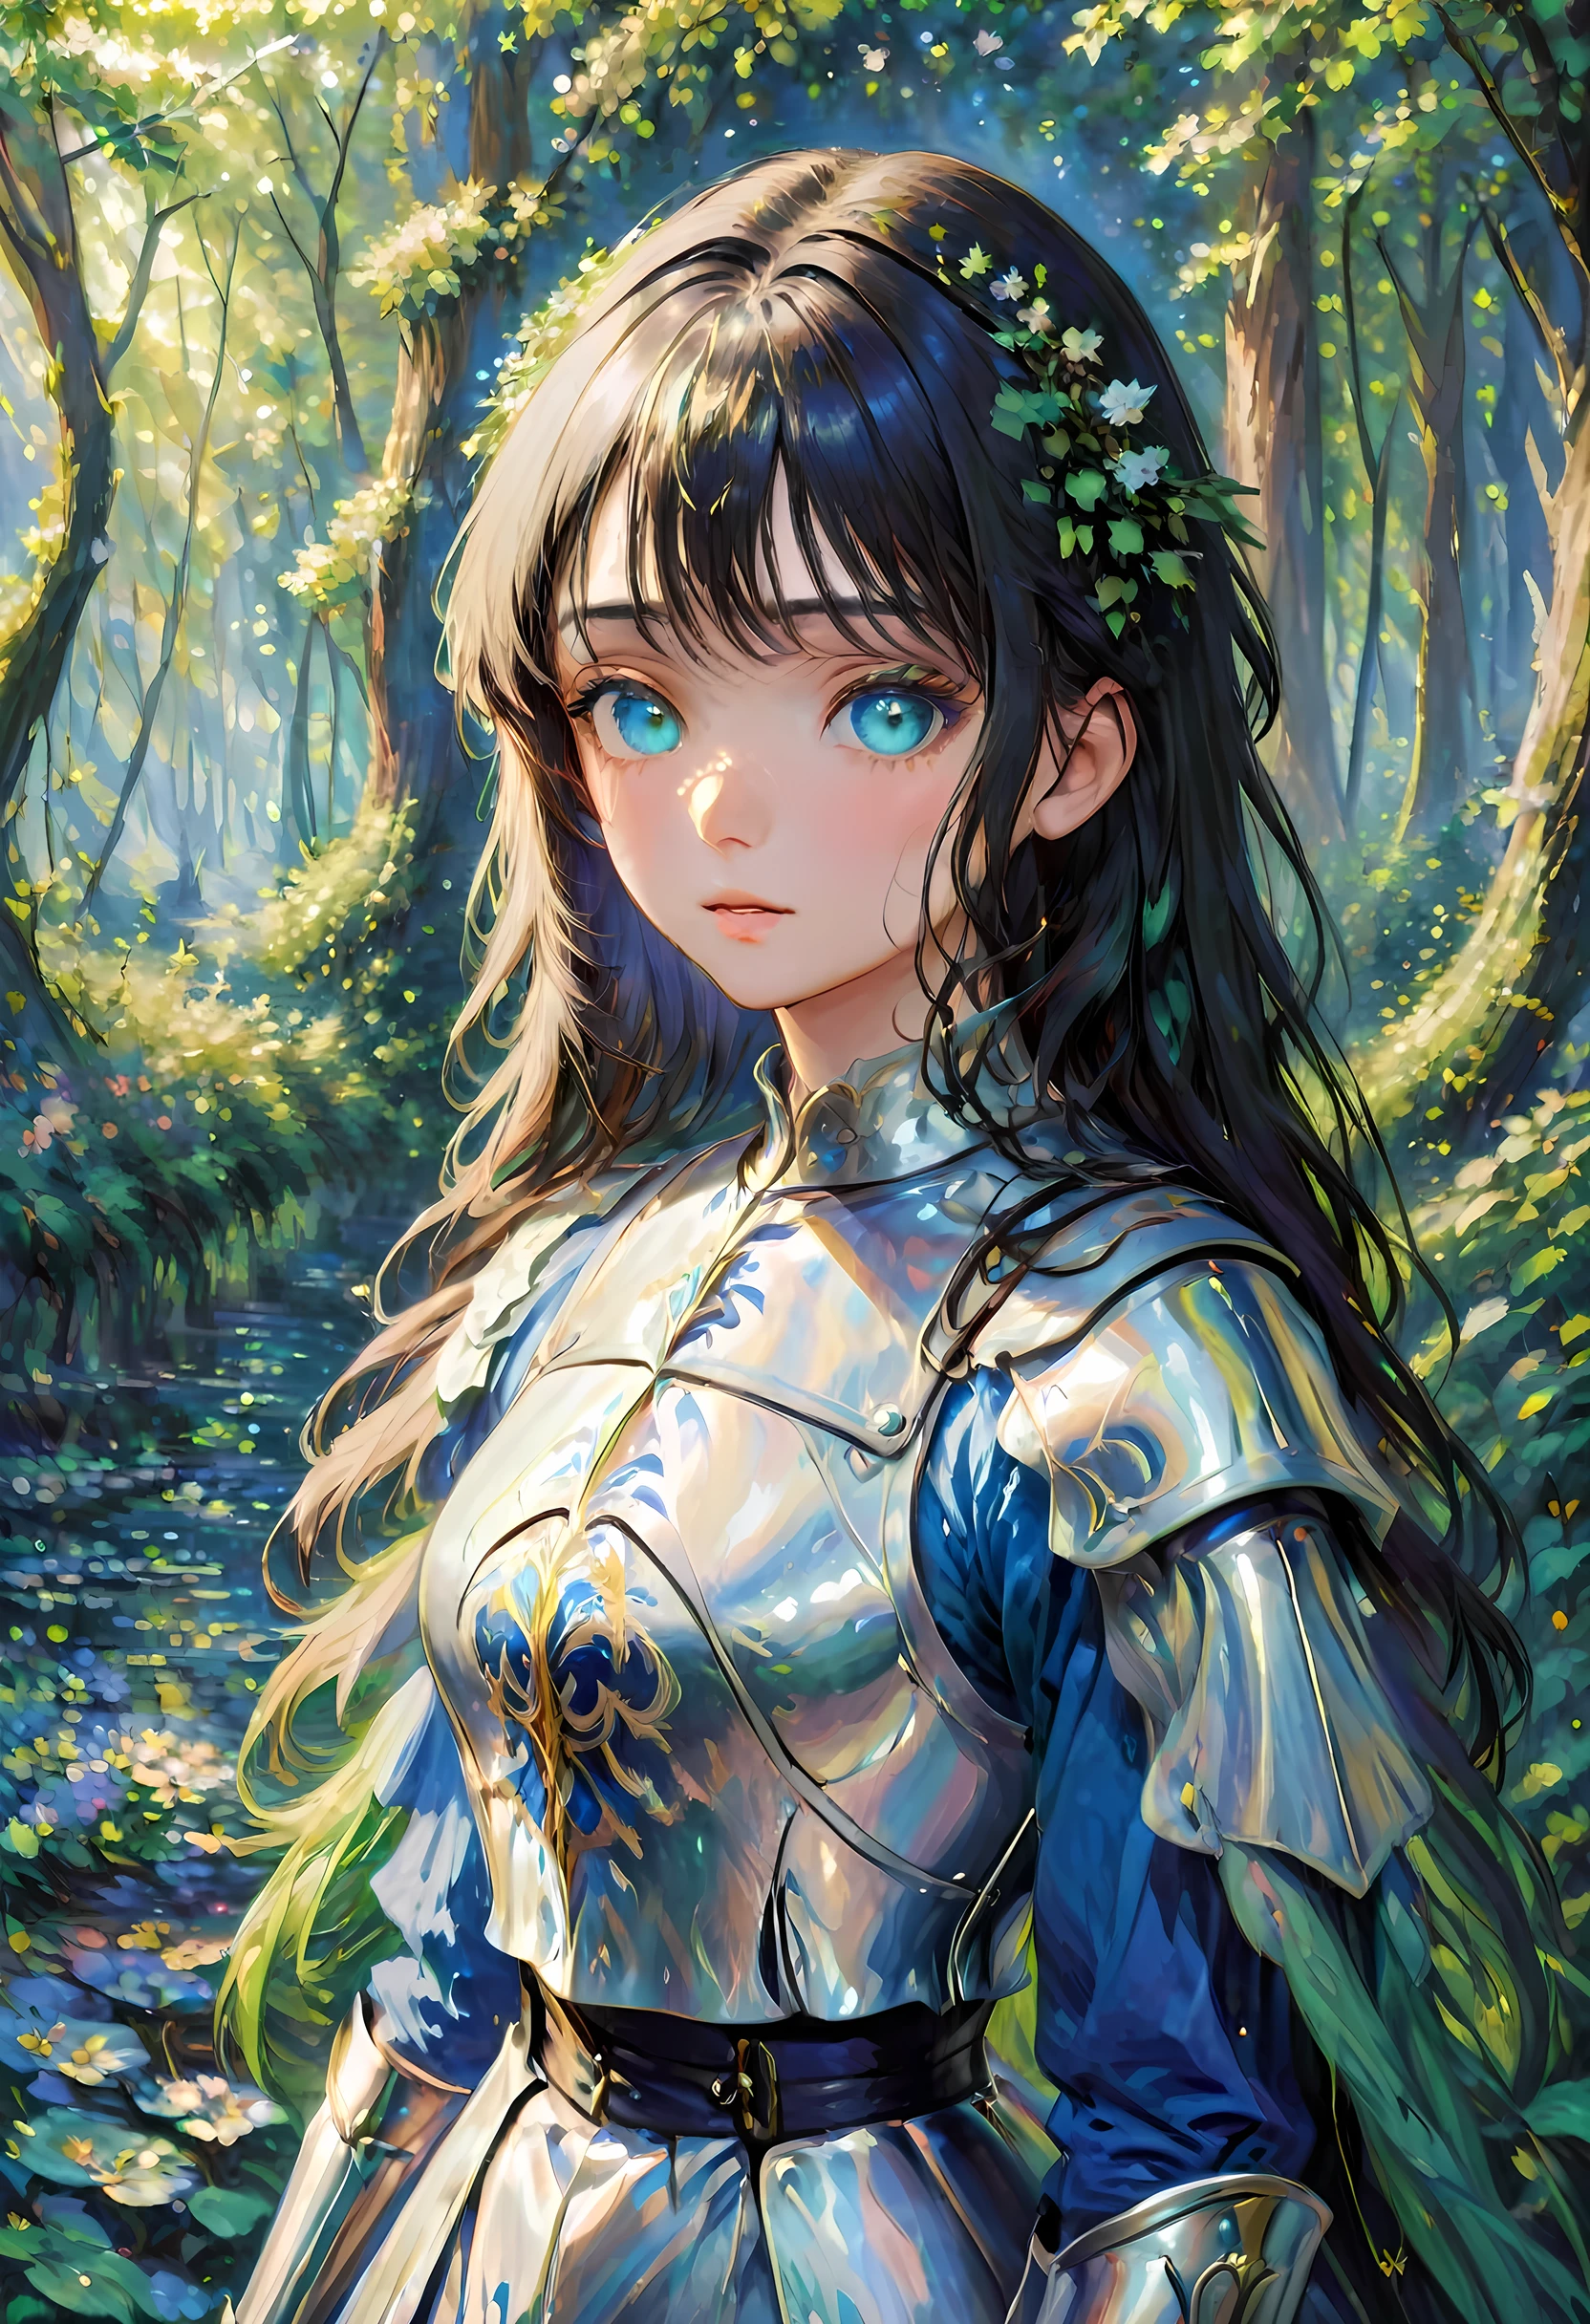 (Claude Monet Style:1.5) Claude_Monet style painting, a picture of woman paladin of nature protecting the forest, a woman knight, black hair, long hair, full body (best details, Masterpiece, best quality :1.5), ultra detailed face (best details, Masterpiece, best quality :1.5), ultra feminine (best details, Masterpiece, best quality :1.5), black hair, long hair, braided hair, pale skin, (deep blue: 1.2) eyes, intense eyes, wearying heavy armor, white armor (best details, Masterpiece, best quality :1.5), green cloak, armed with a sword, glowing sword GlowingRunes_green, fantasy forest background, D&D art, RPG art, magical atmosphere magic-fantasy-forest, ultra best realistic, best details, best quality, 16k, [ultra detailed], masterpiece, best quality, (extremely detailed), ultra wide shot, photorealism, depth of field, hyper realistic painting, cybrk, RagingNebula
